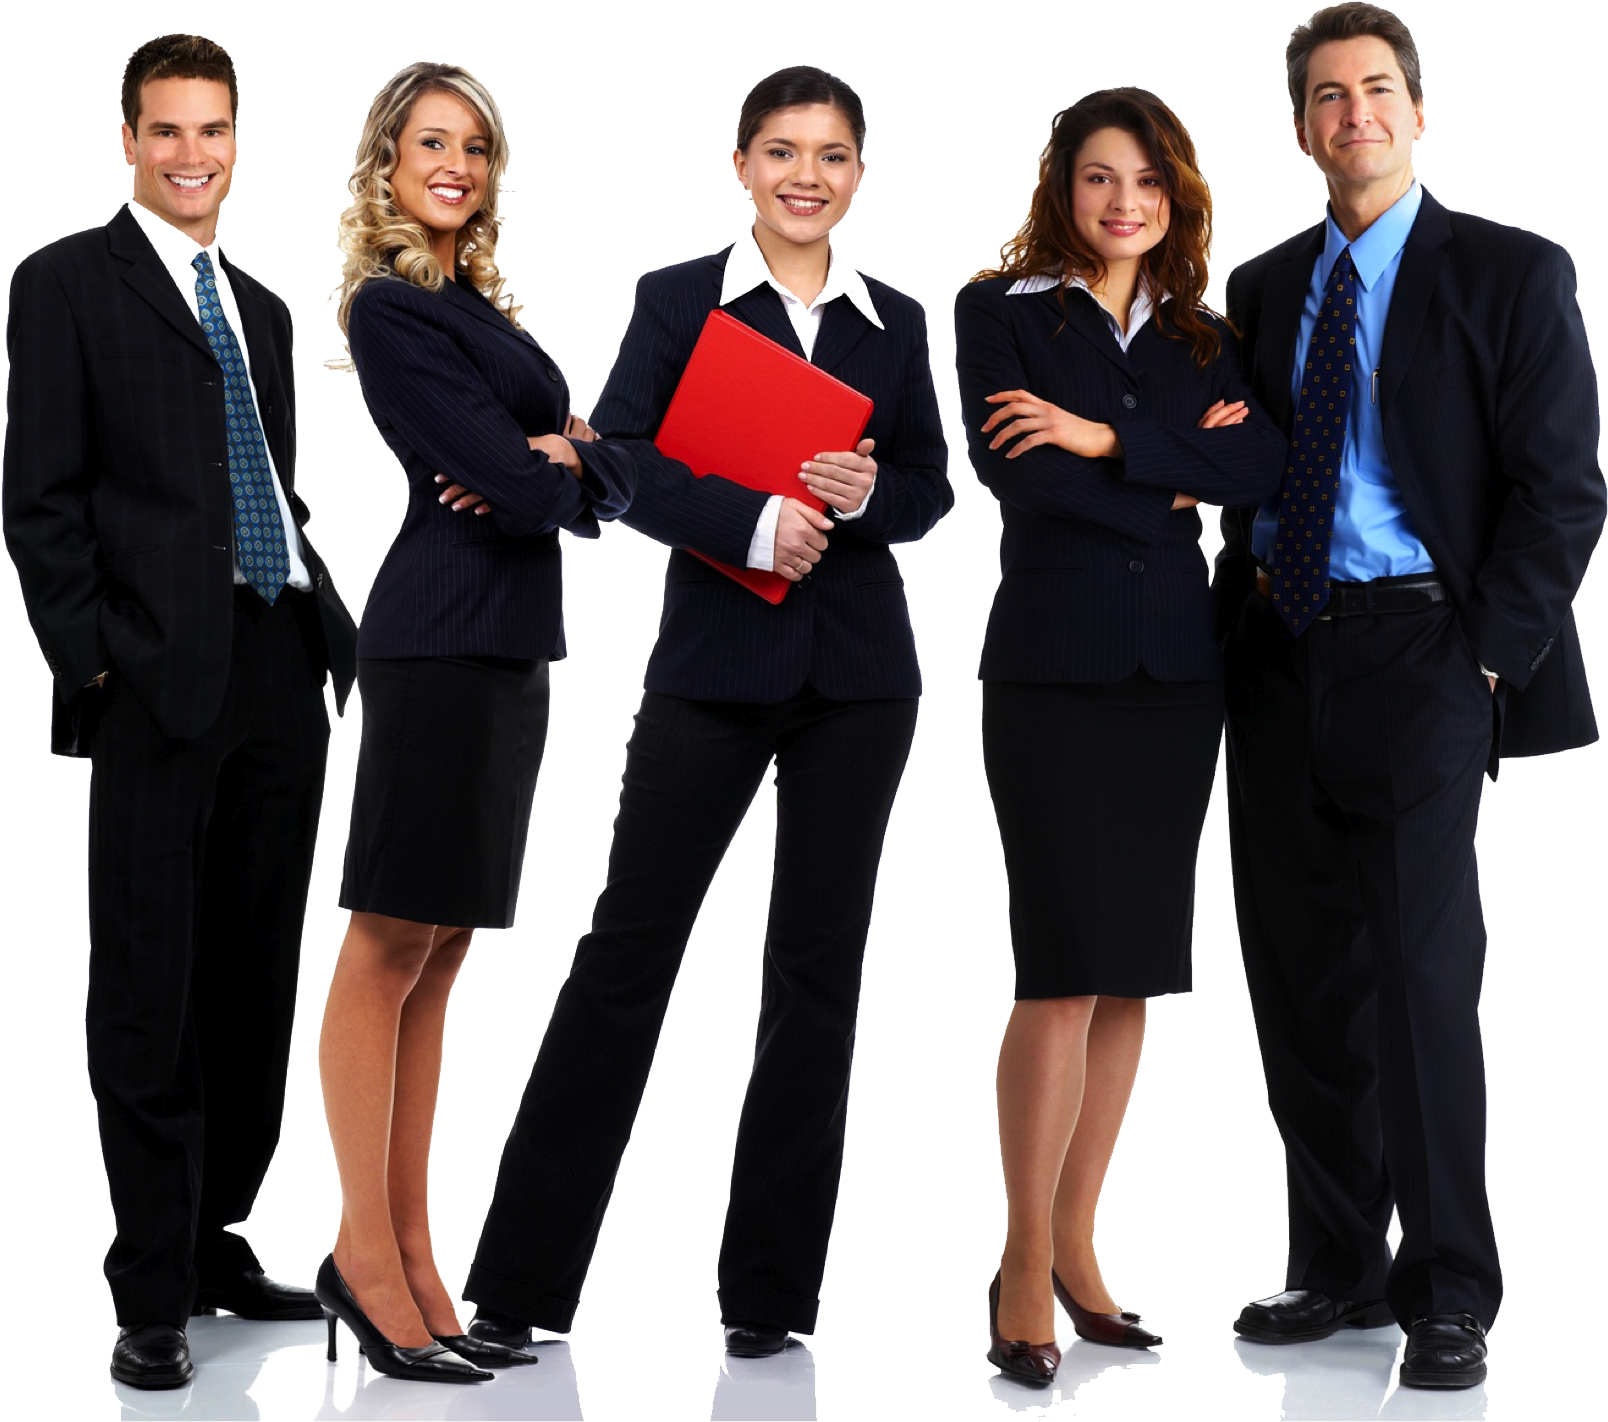 download business people png hd formal attire for men and women png image with no background pngkey com business people png hd formal attire